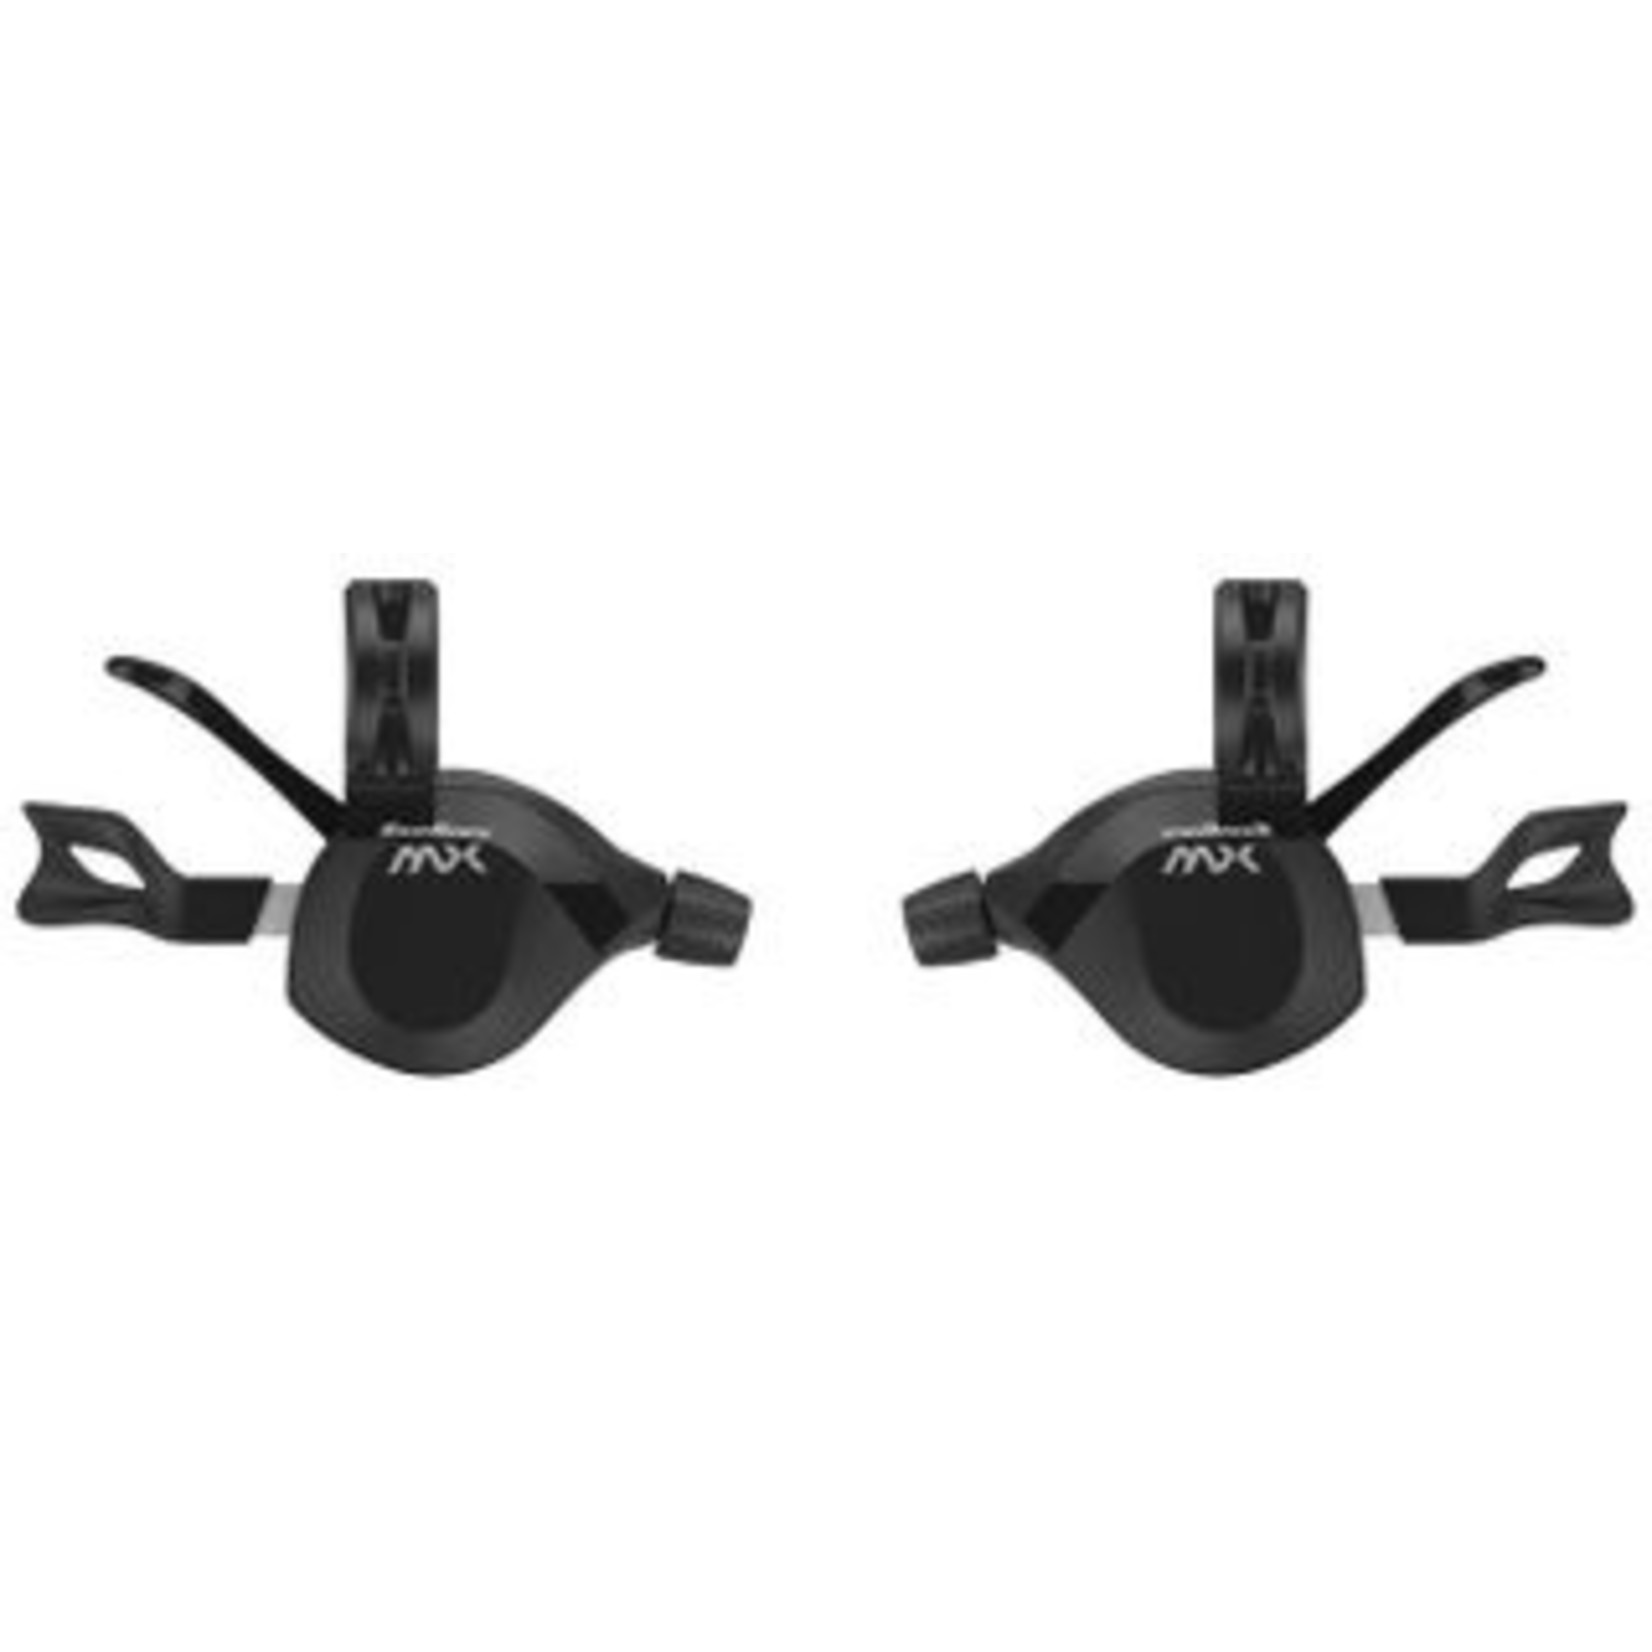 Sunrace Sunrace Dual Shifter - Trigger Lever Set (R11 Speed & L2 Speed) With Inner Wire - Black